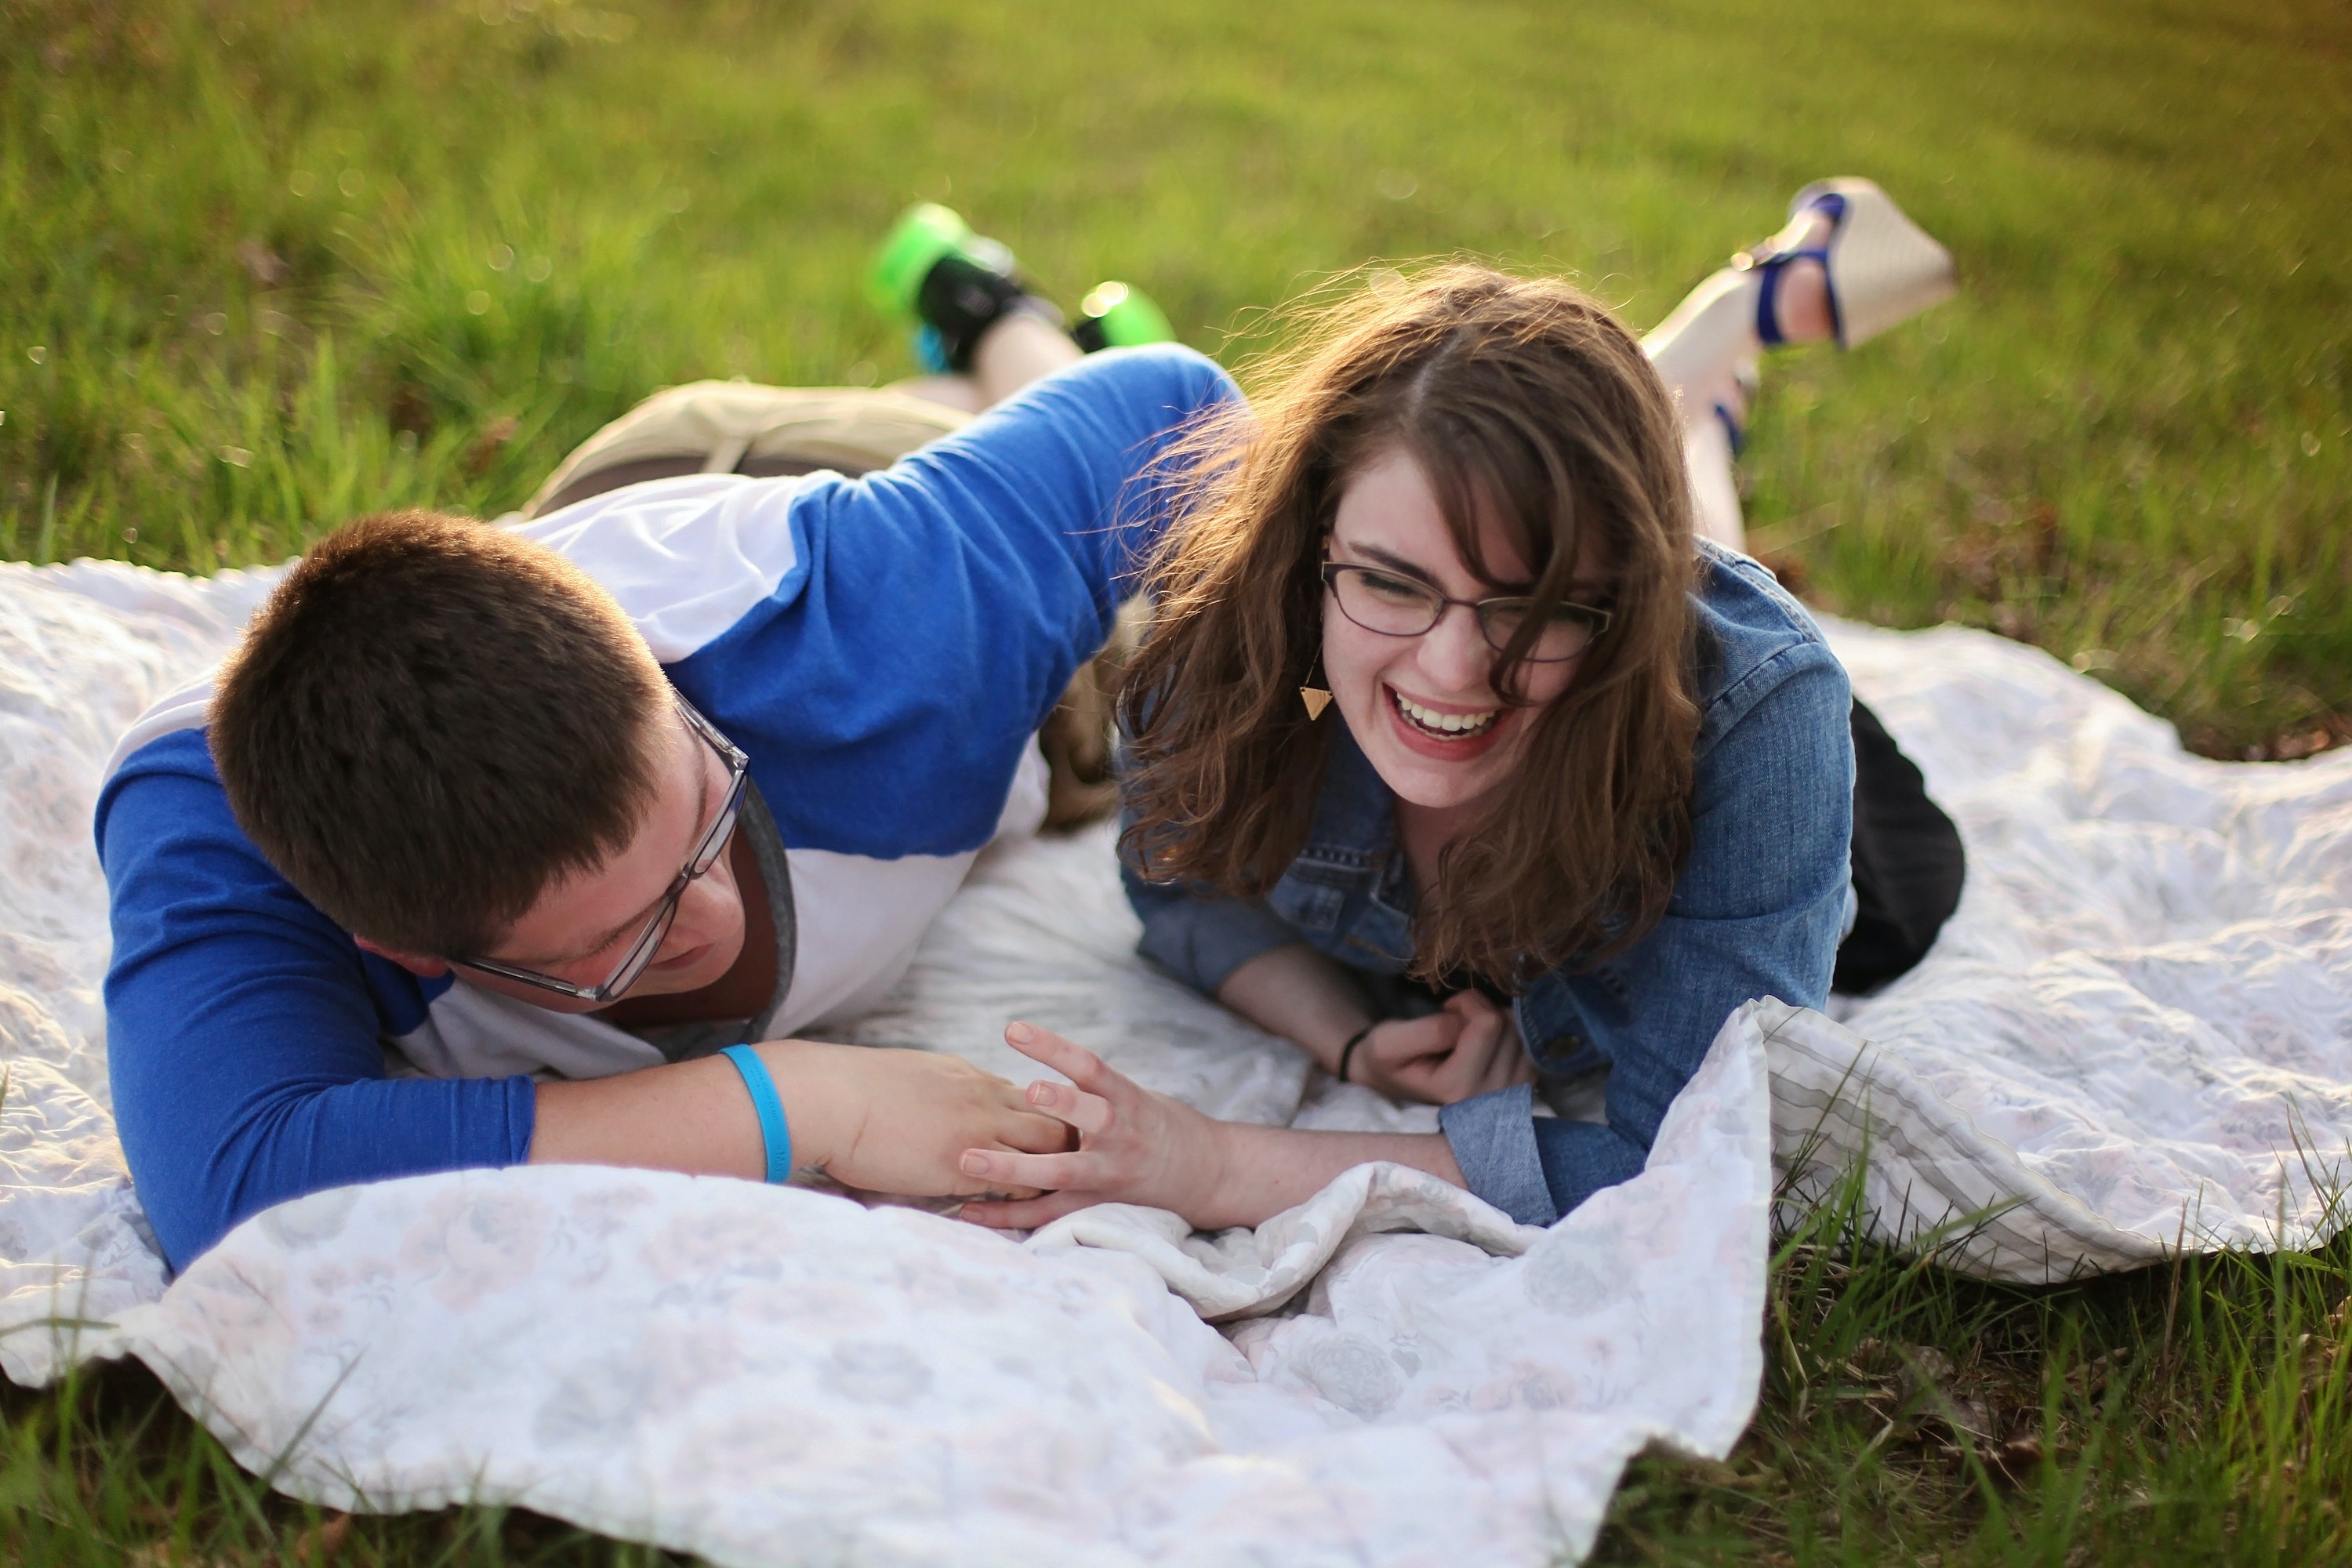 Couple laughing on top of a picnic blanket. | Source: Pexels